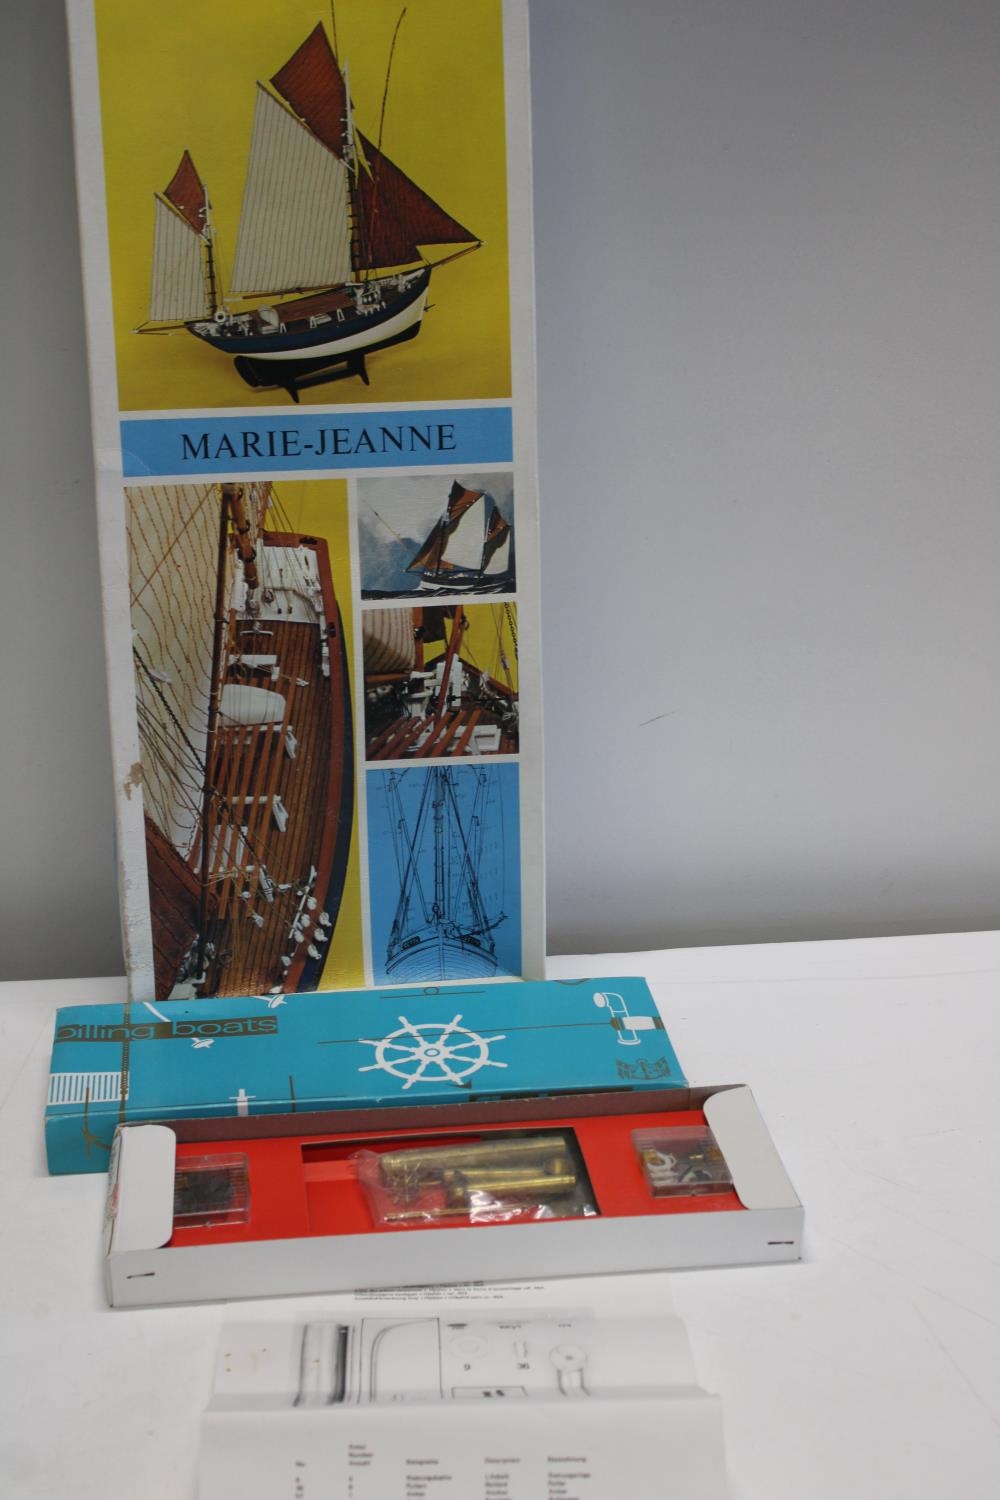 Billing boat model and accessory kit